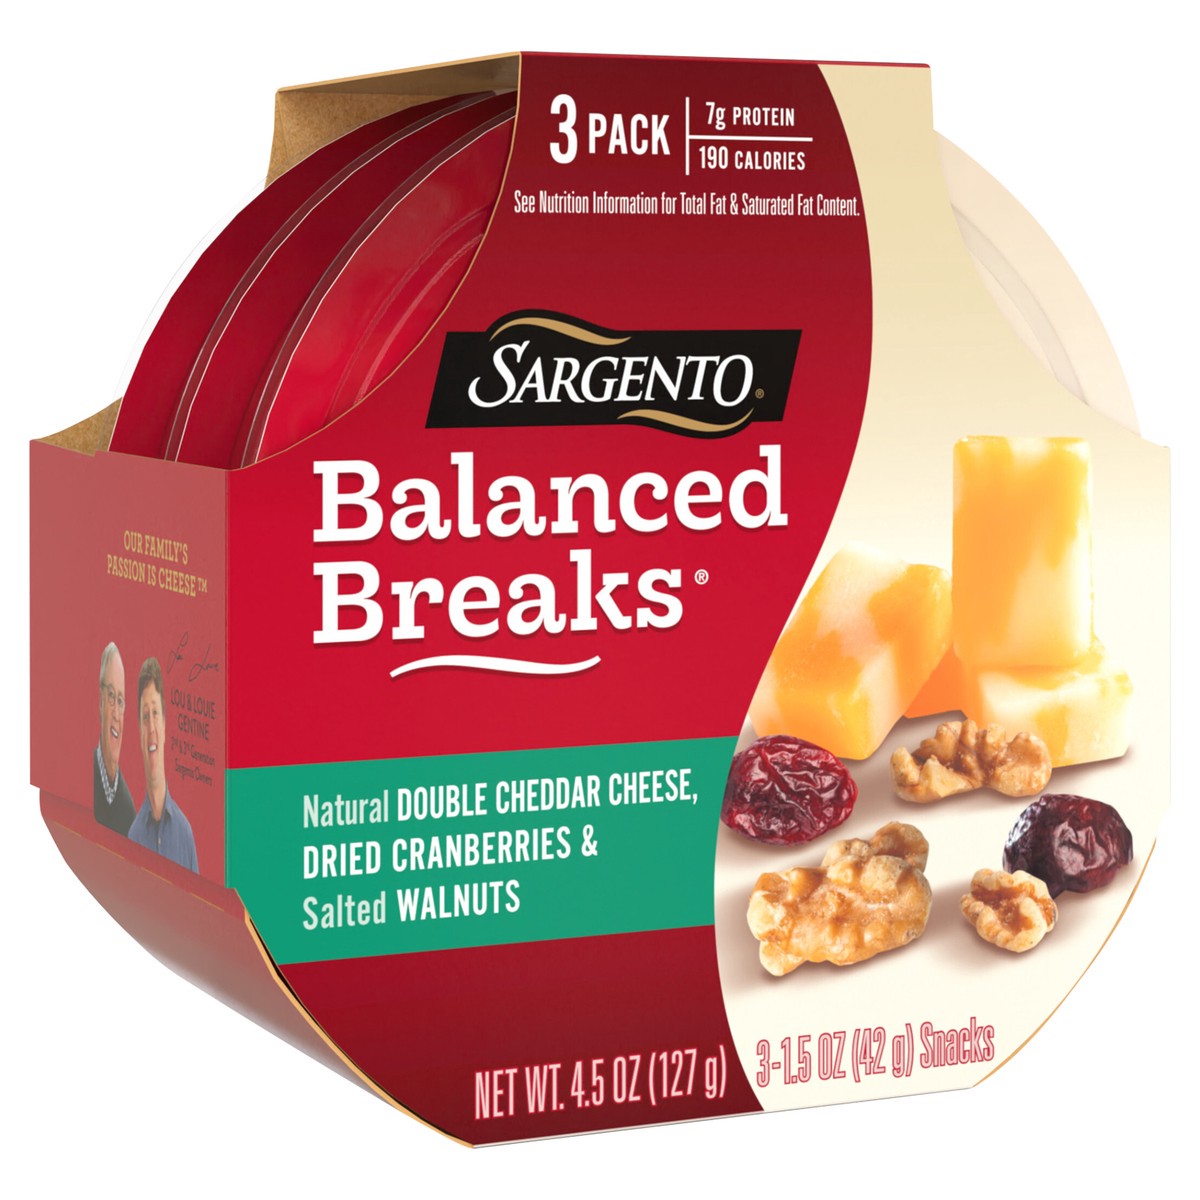 slide 8 of 14, Sargento Balanced Breaks with Natural Double Cheddar Cheese, Dried Cranberries and Salted Walnuts, 1.5 oz., 3-Pack, 4.5 oz